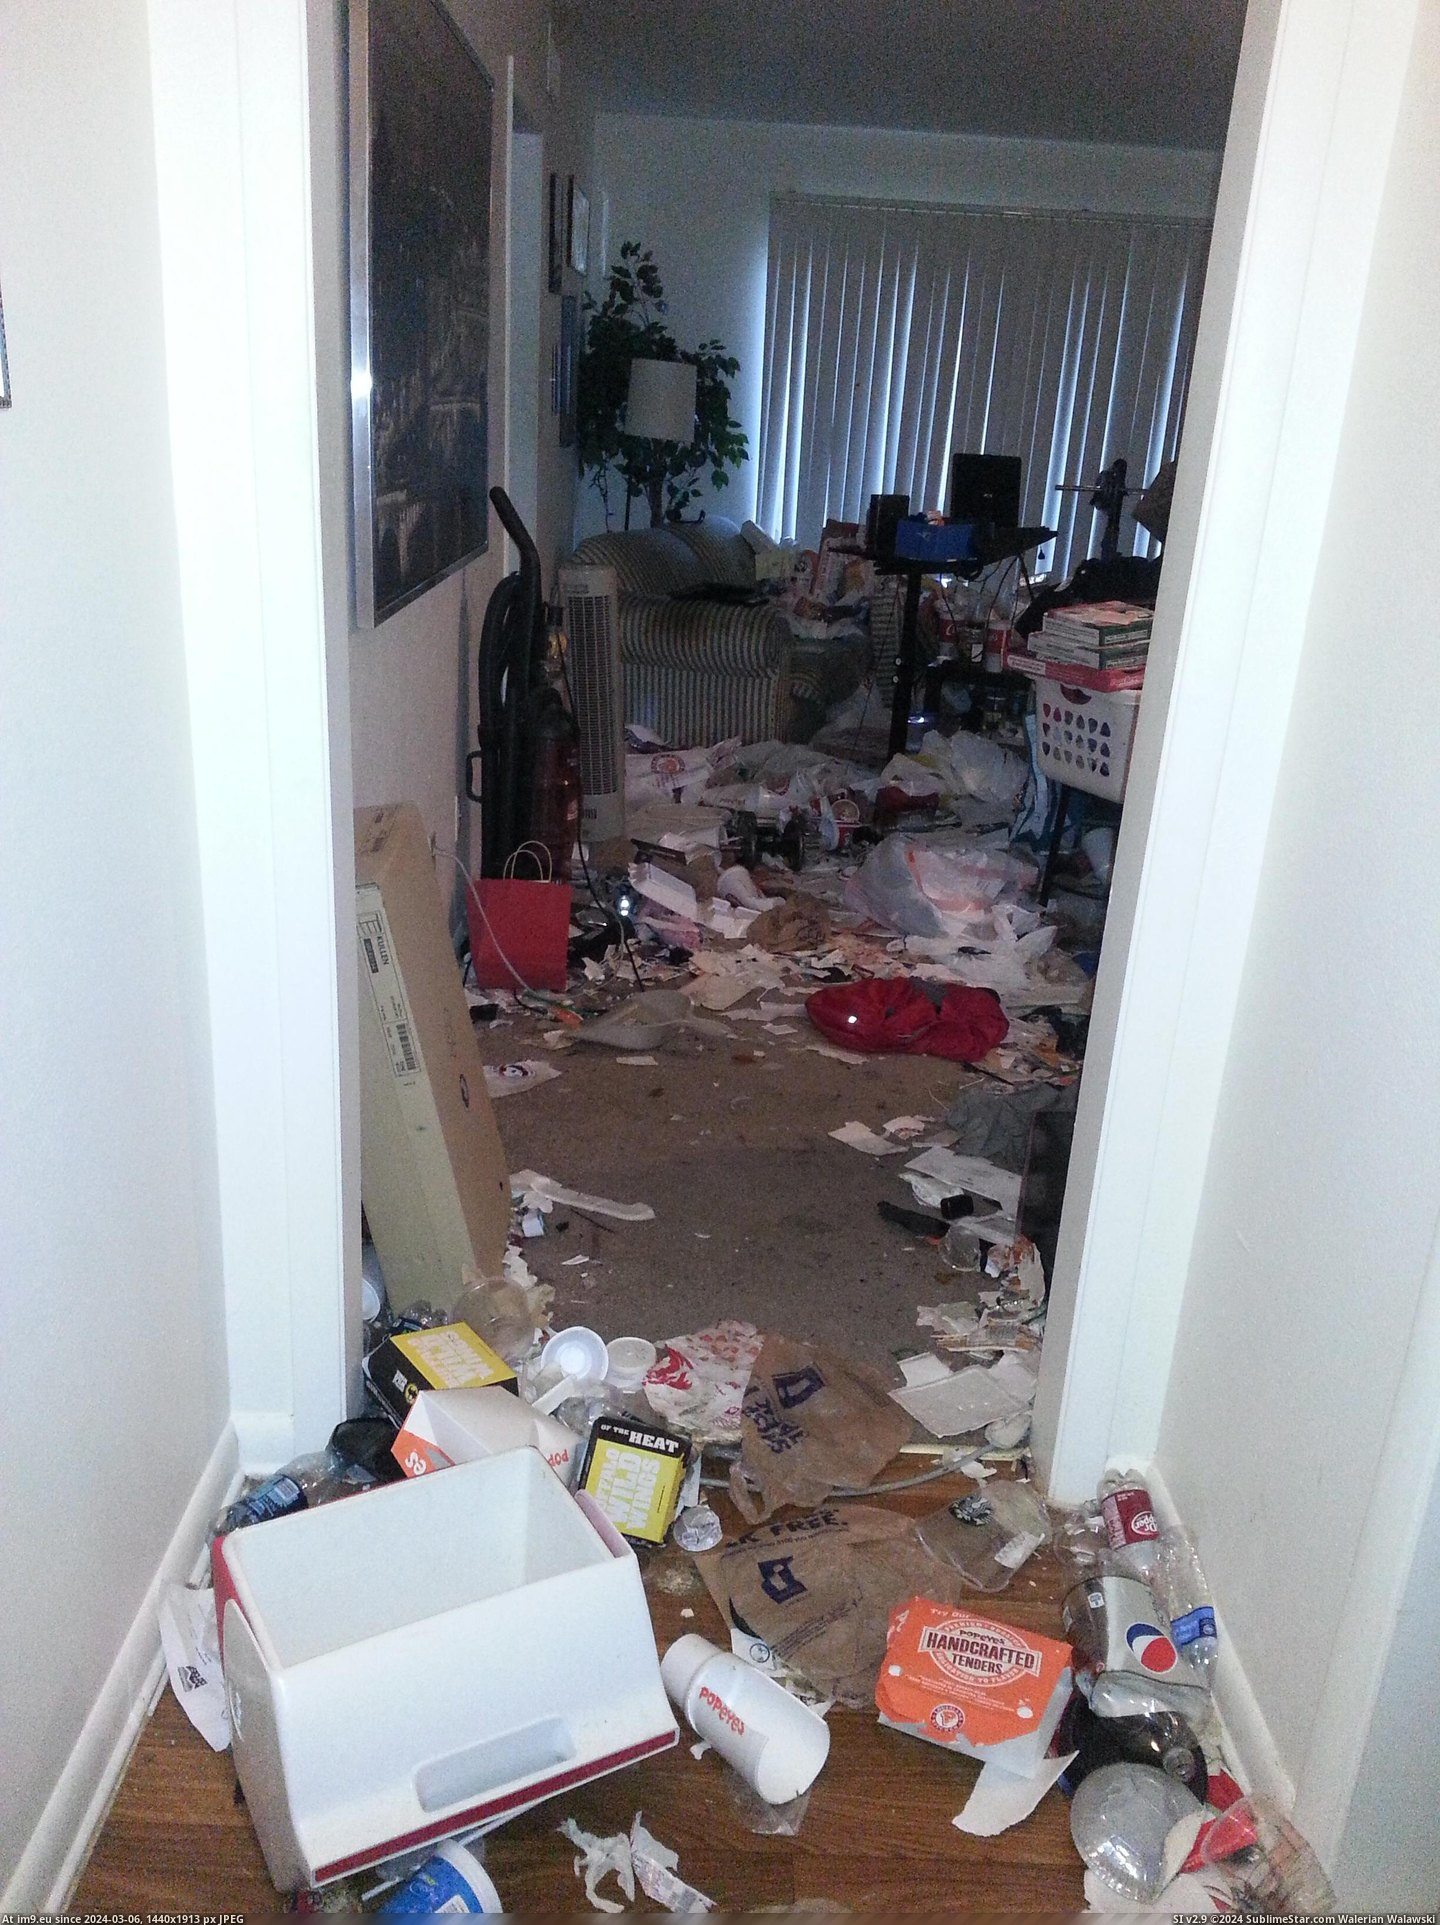 #For #Had #Bit #Brother #Apartment #Drove #Funk #Called #Hours #Walk #Clean [Pics] My brother had been in a bit of a funk. He called me for help to clean his apartment. I drove 4 hours to walk into this.  Pic. (Image of album My r/PICS favs))